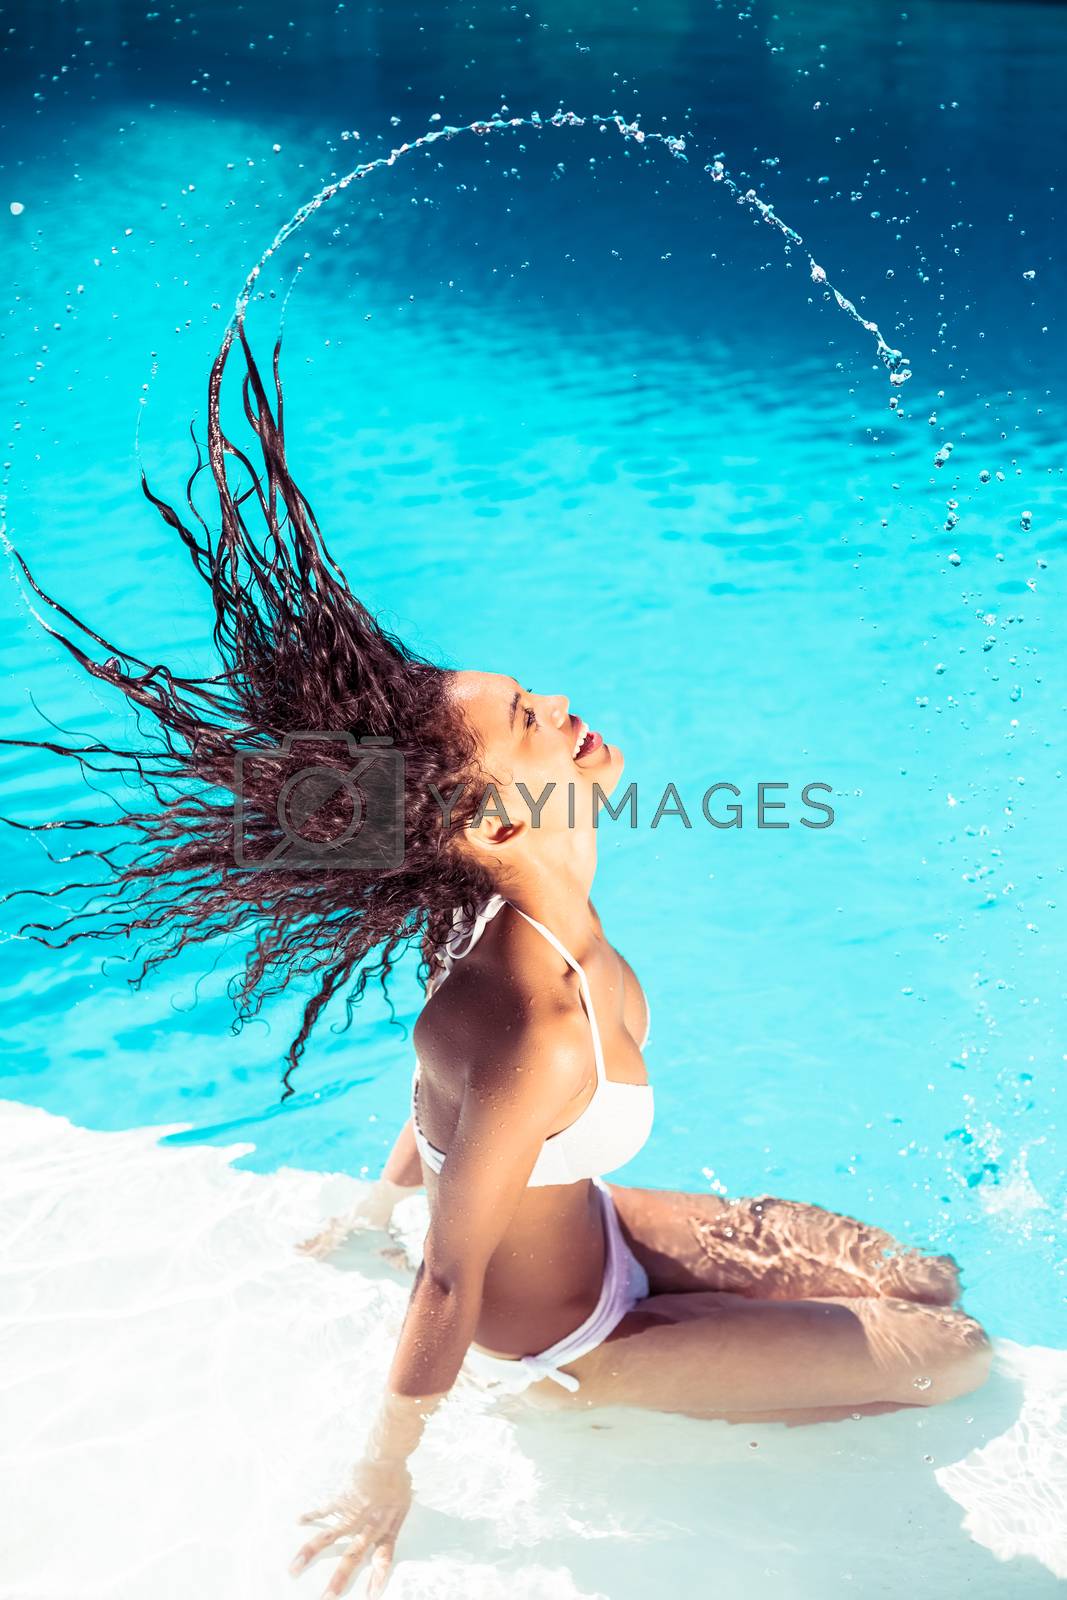 Royalty free image of Beautiful woman tossing her wet hair by Wavebreakmedia